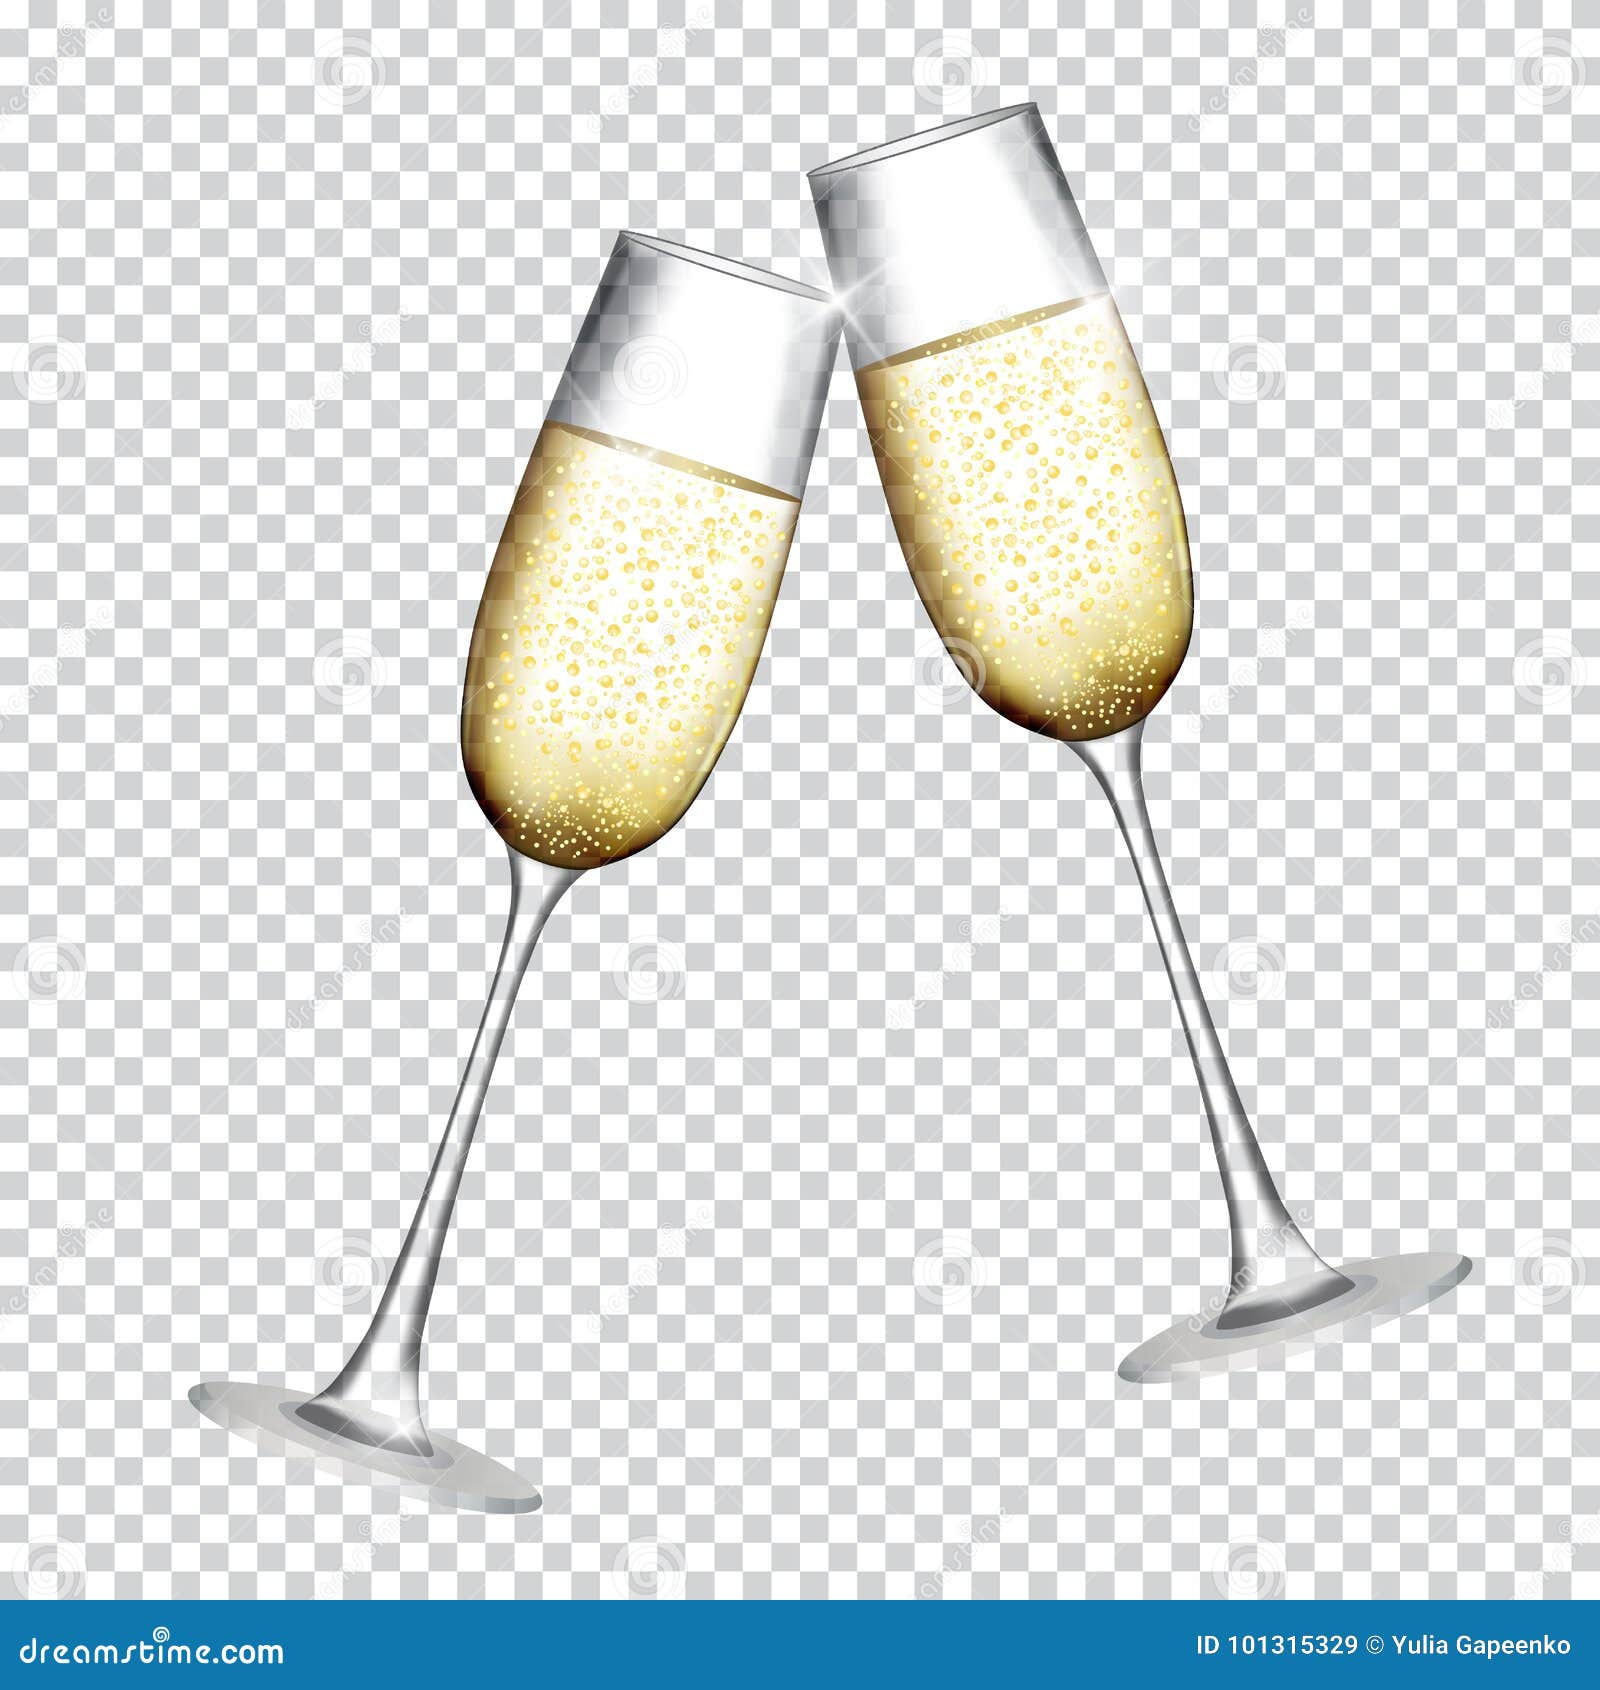 https://thumbs.dreamstime.com/z/two-glass-champagne-transparent-background-vector-illustration-eps-two-glass-champagne-transparent-background-vector-101315329.jpg